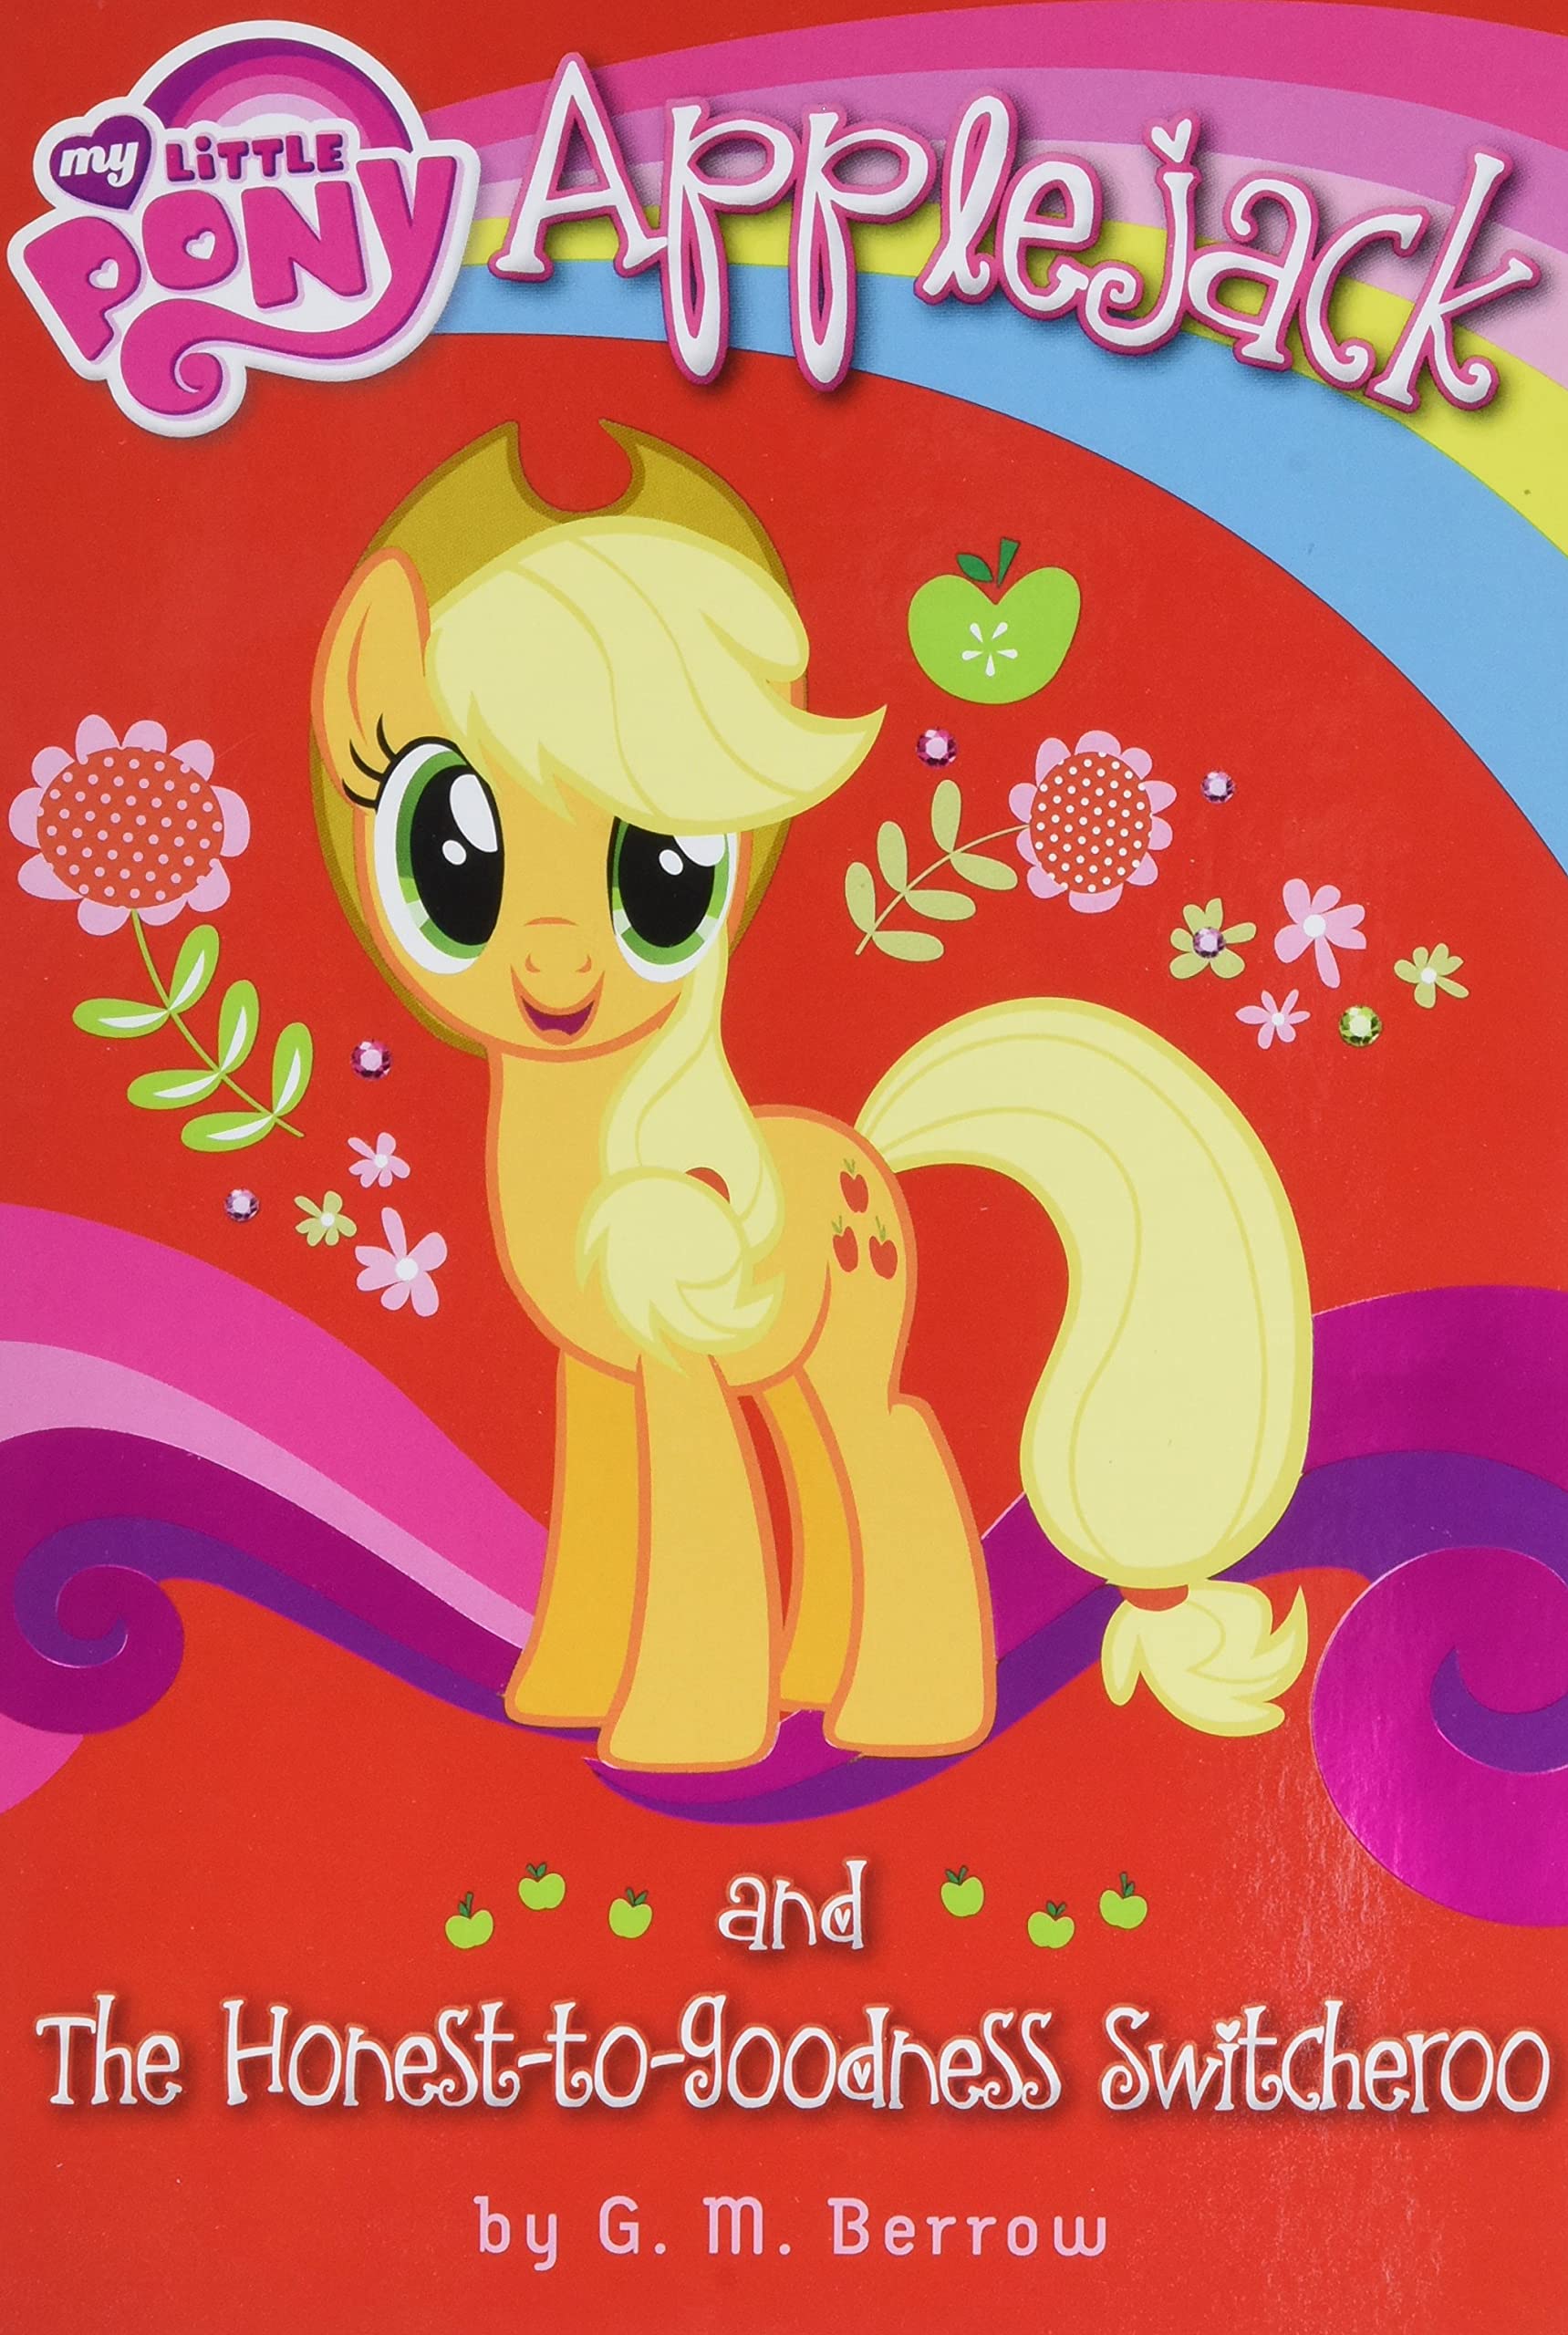 MLP Applejack and the Honest-to-Goodness Switcheroo Book 1